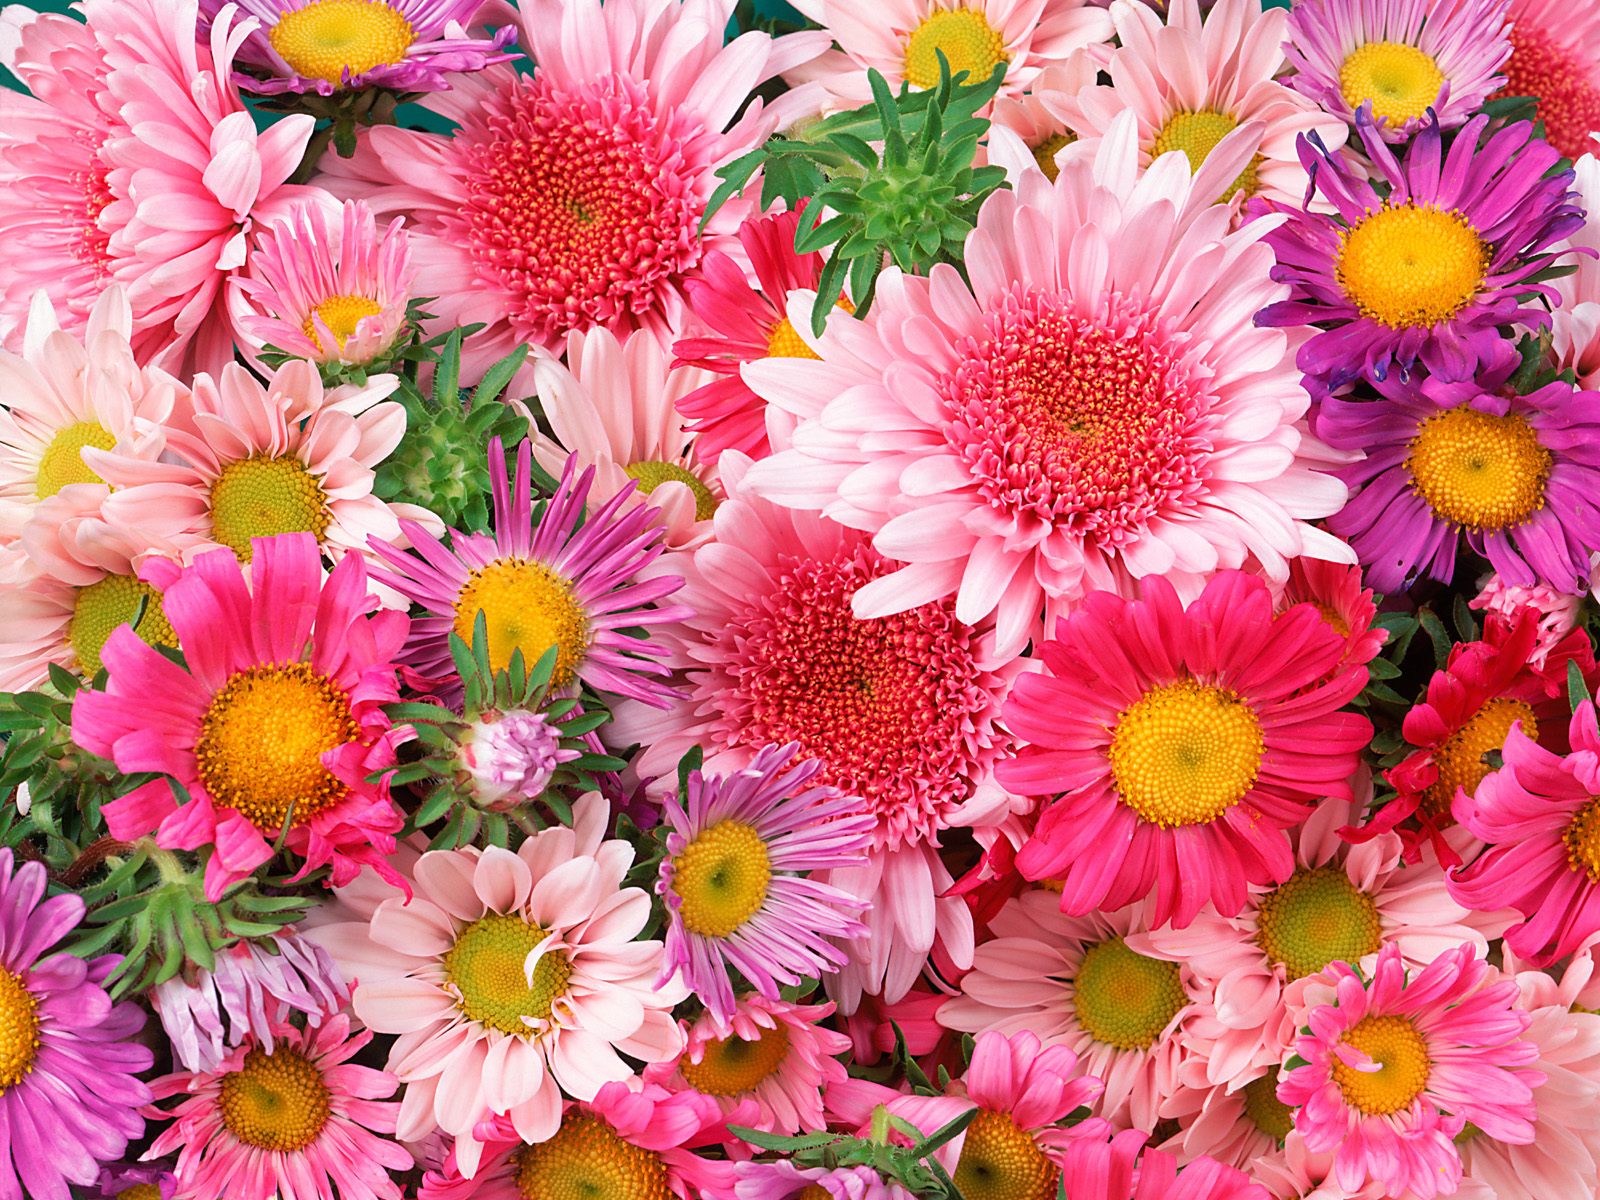 Flowers amp Planets wallpapers flowers nature 1600x1200